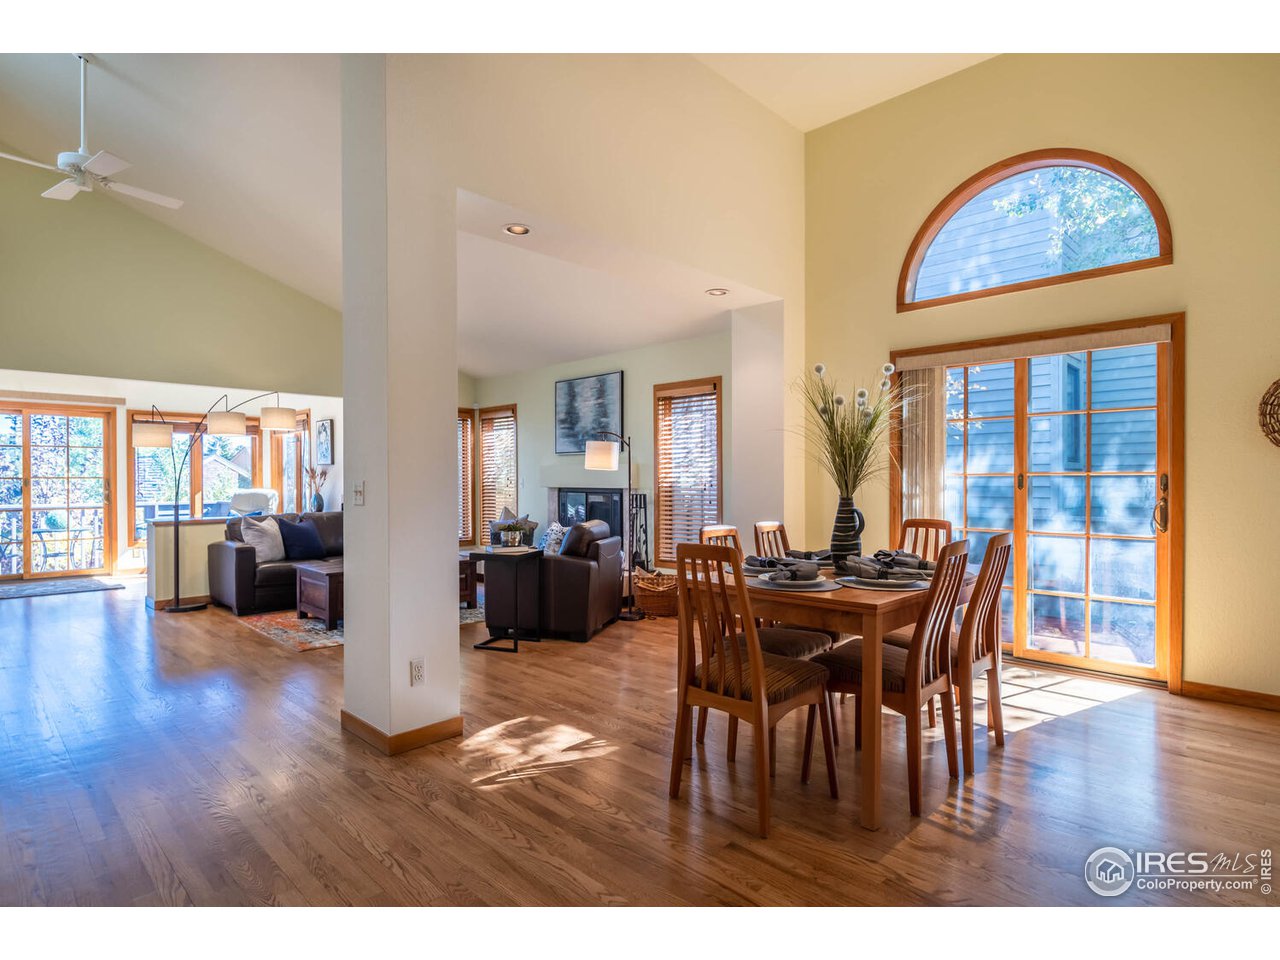 Sun-drenched main floor living w/ vaulted ceilings